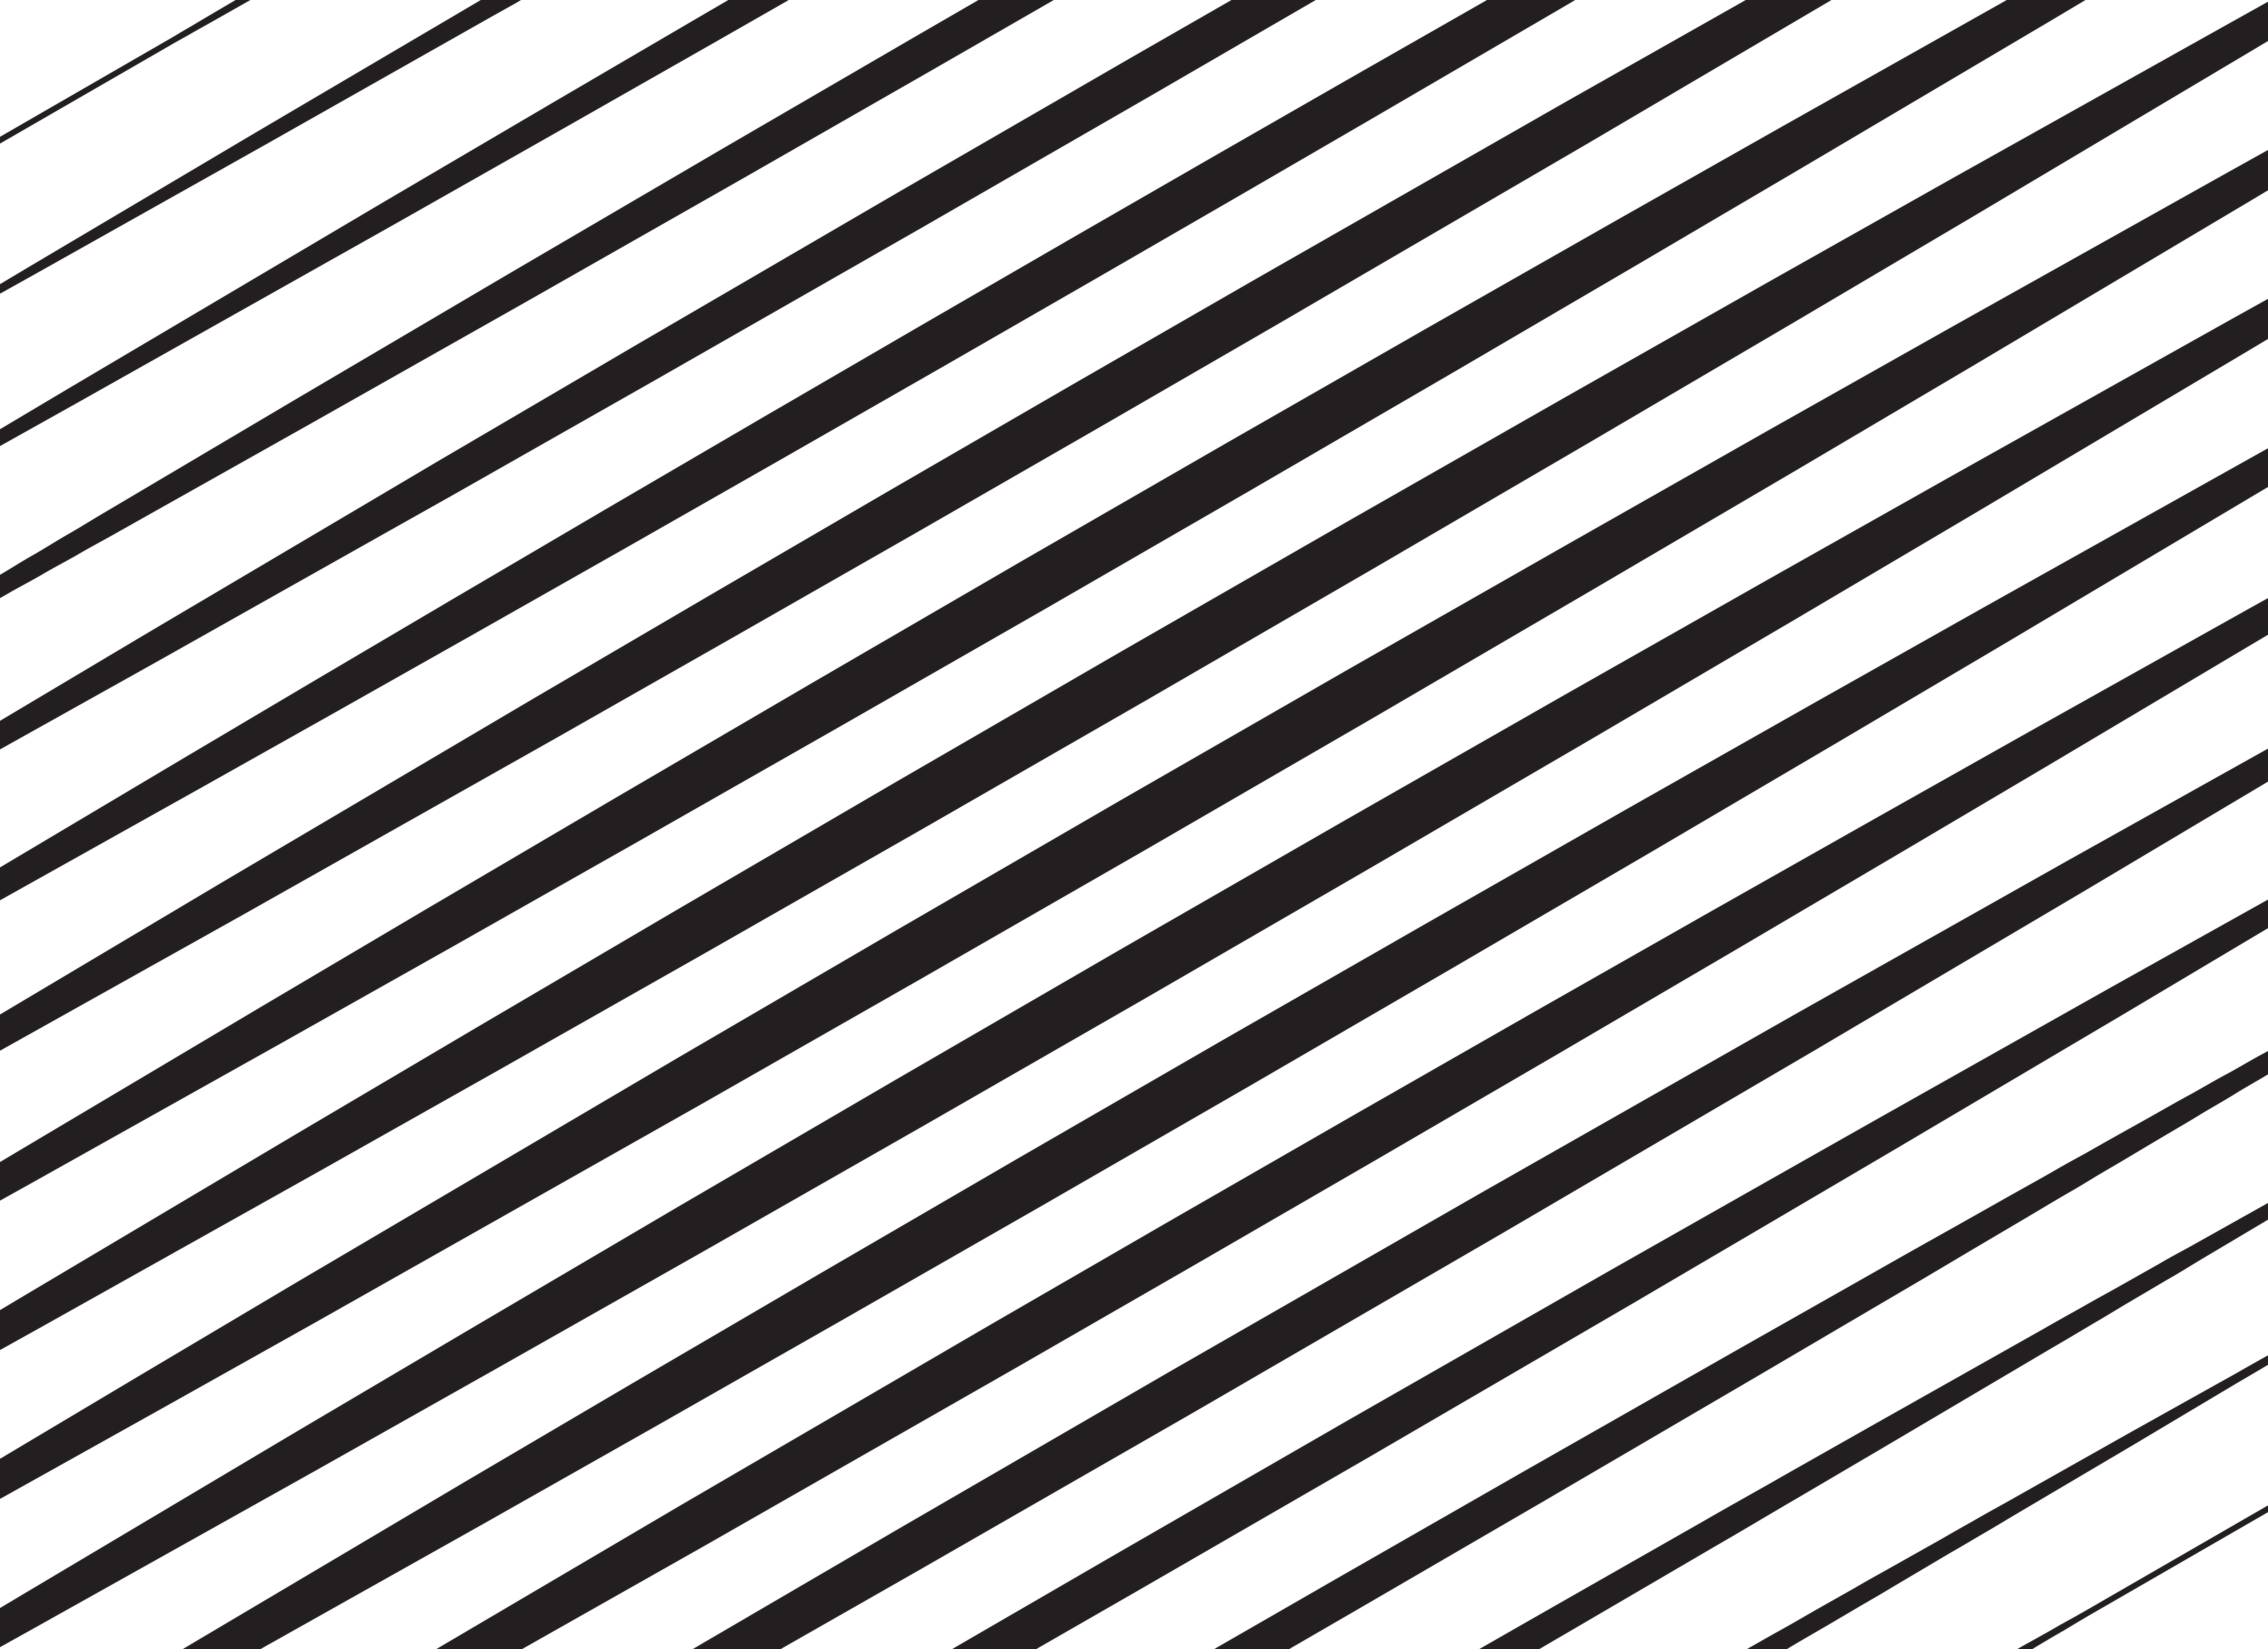 abstract-diagonal-lines-pattern-background-download-free-vector-art